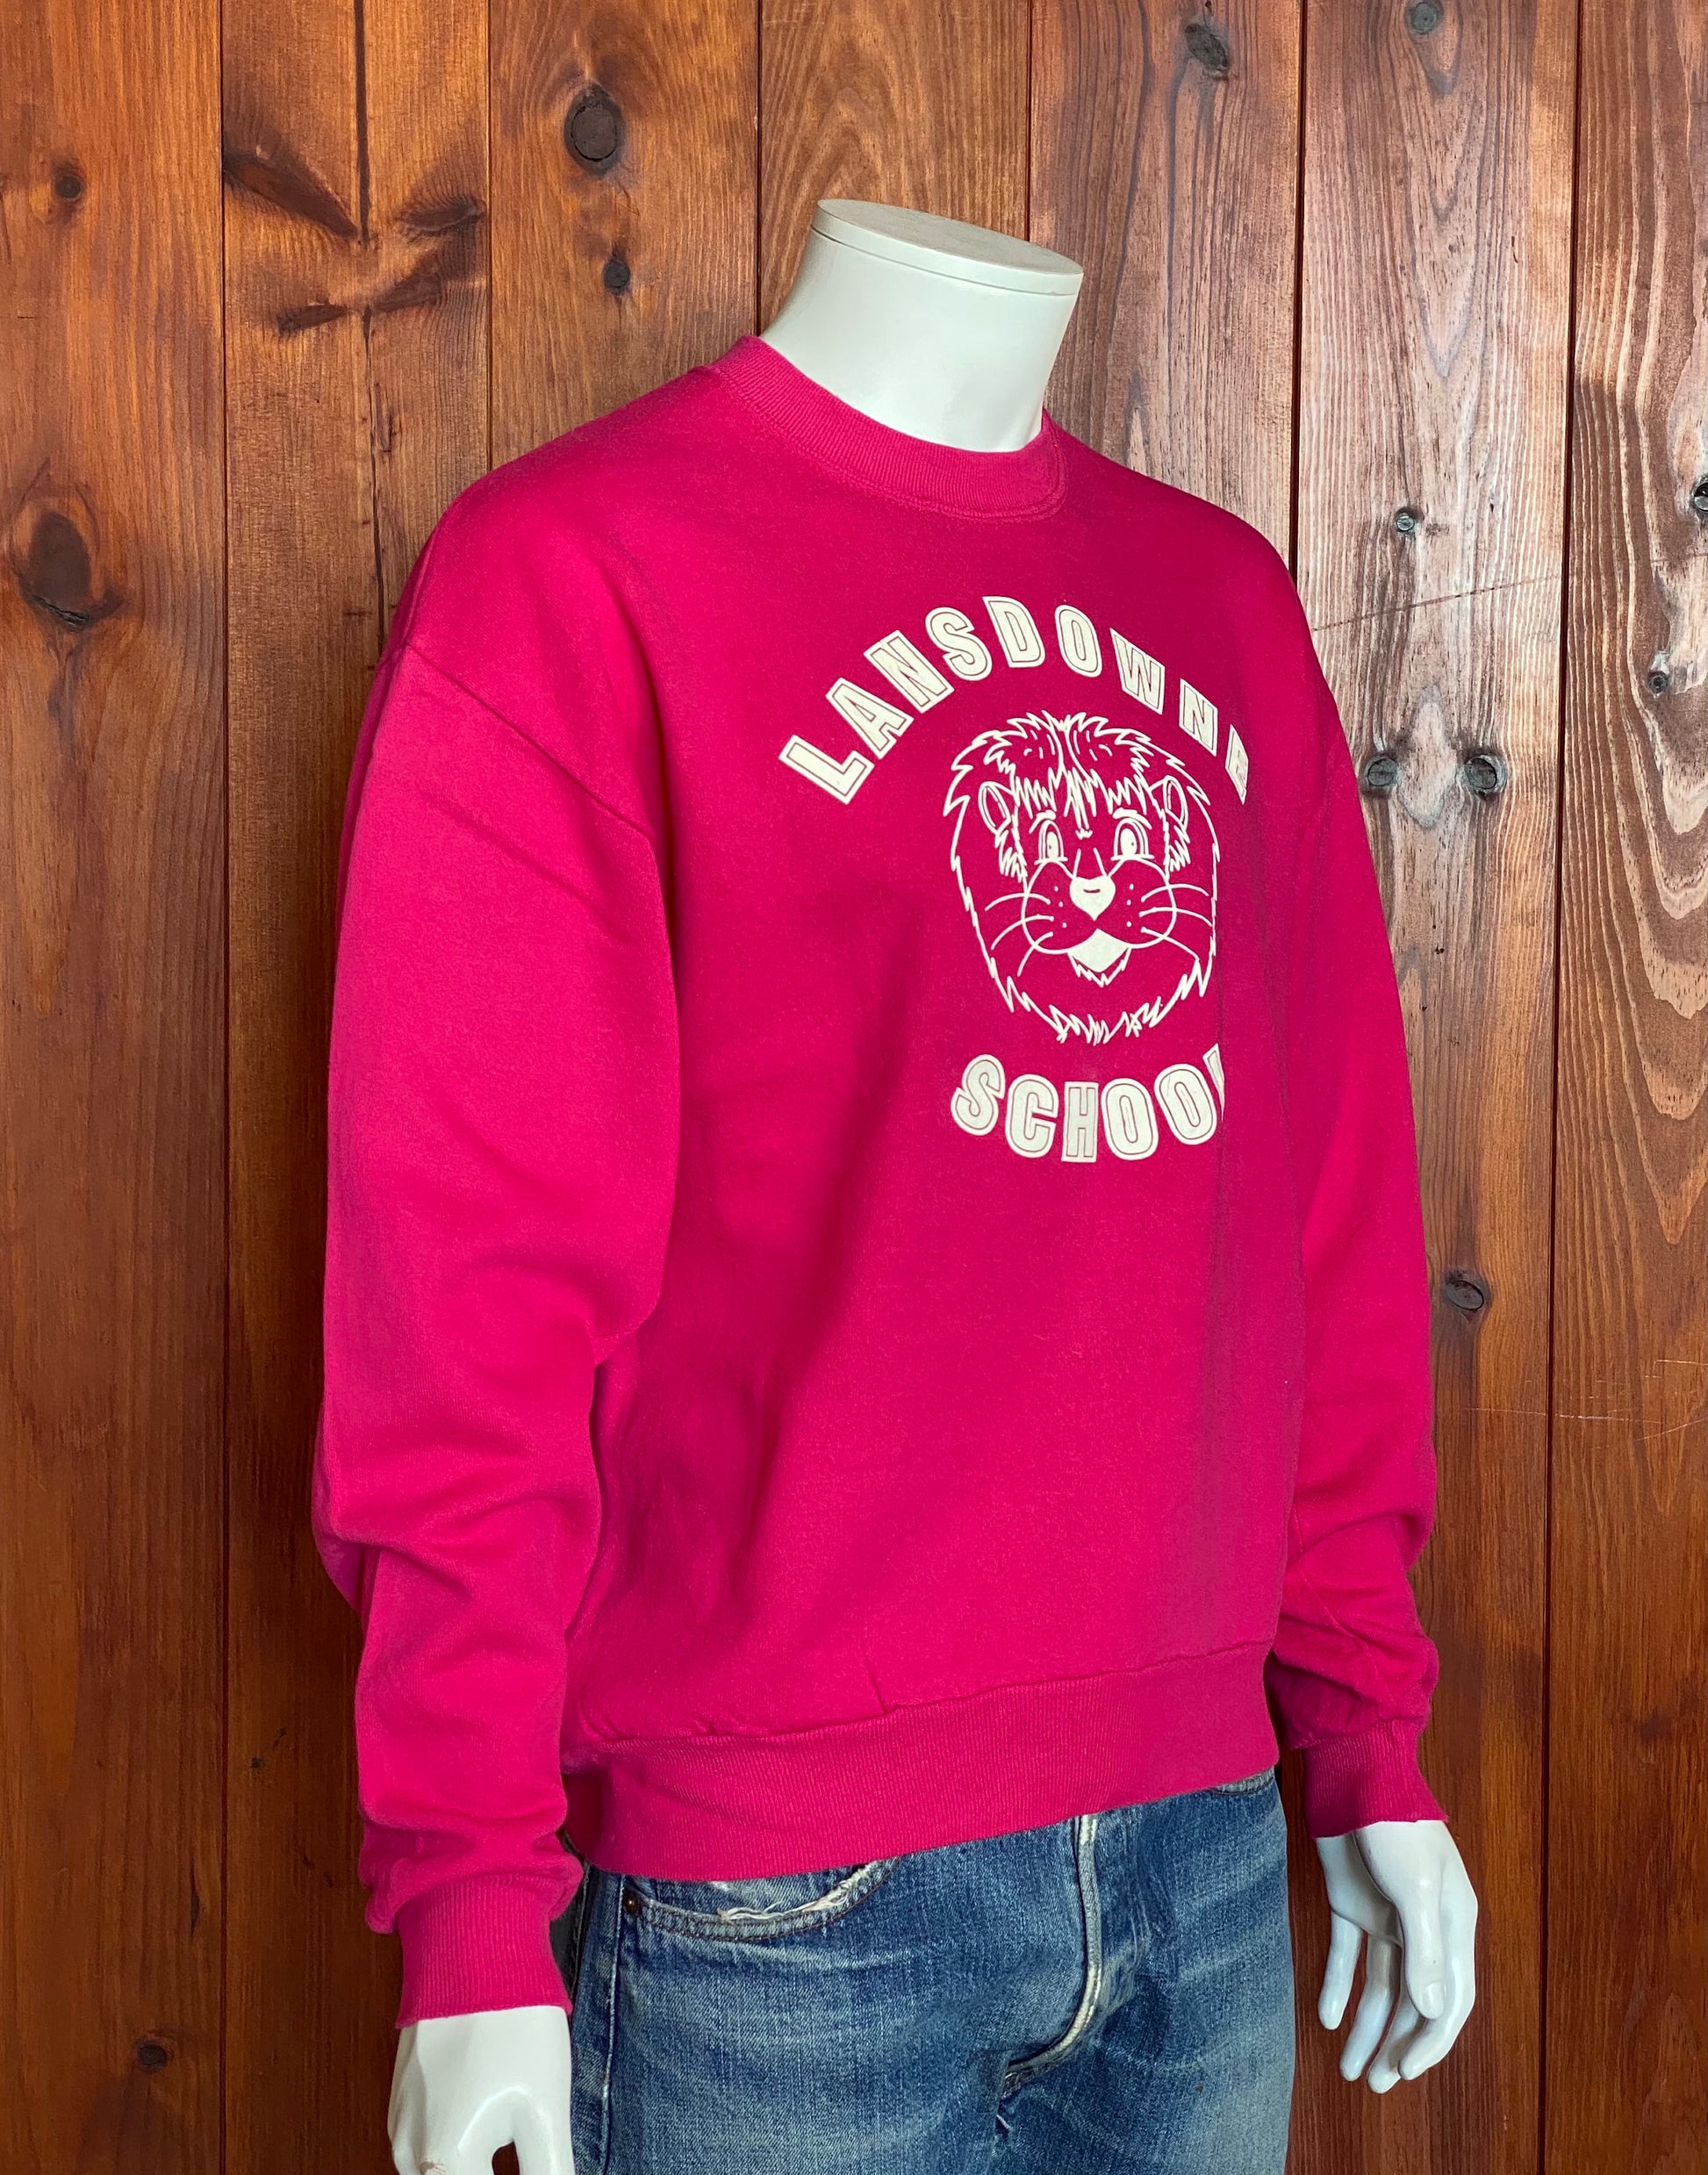 "Large 90s Lansdowne School Vintage Sweatshirt: Classic Retro Apparel Made in USA by Jerzees"